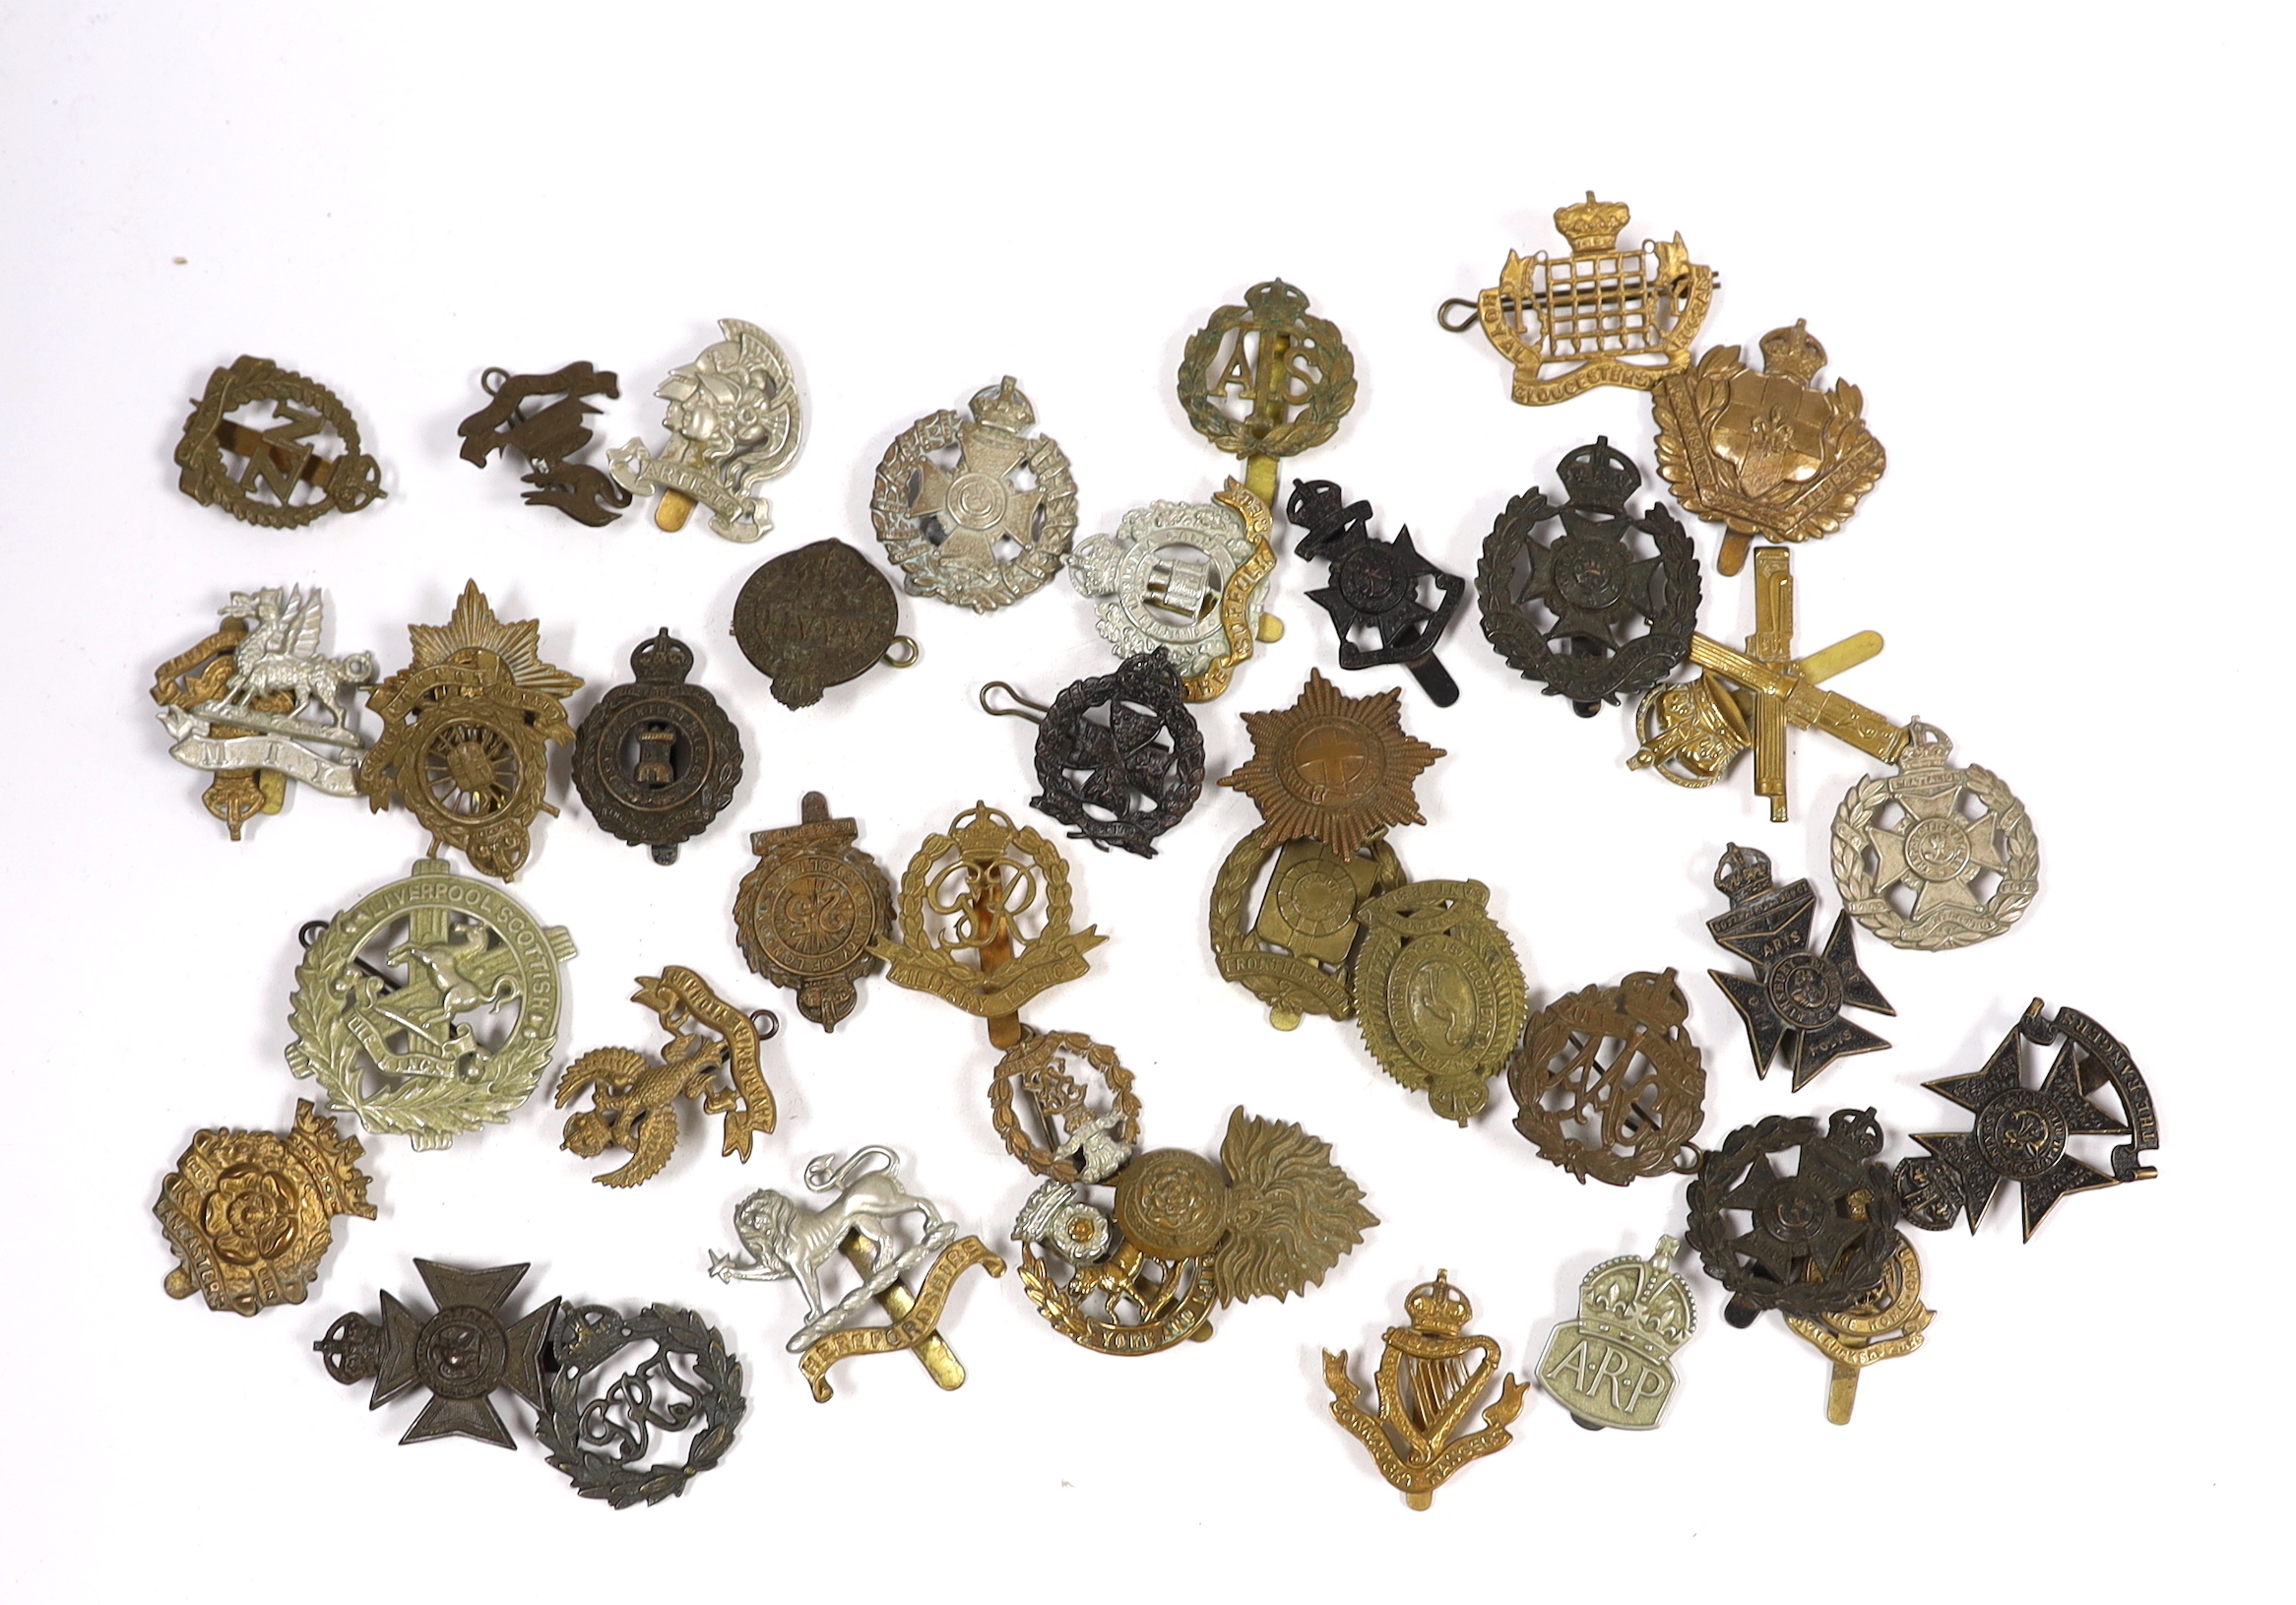 Forty military cap badges including City of London Cyclists, Lincolnshire Yeomanry, Connaught Rangers, The County of London, Royal Gloucestershire Hussars, NAAFI, Military Police, the Rangers, Sussex Yeomanry, Lanarkshir